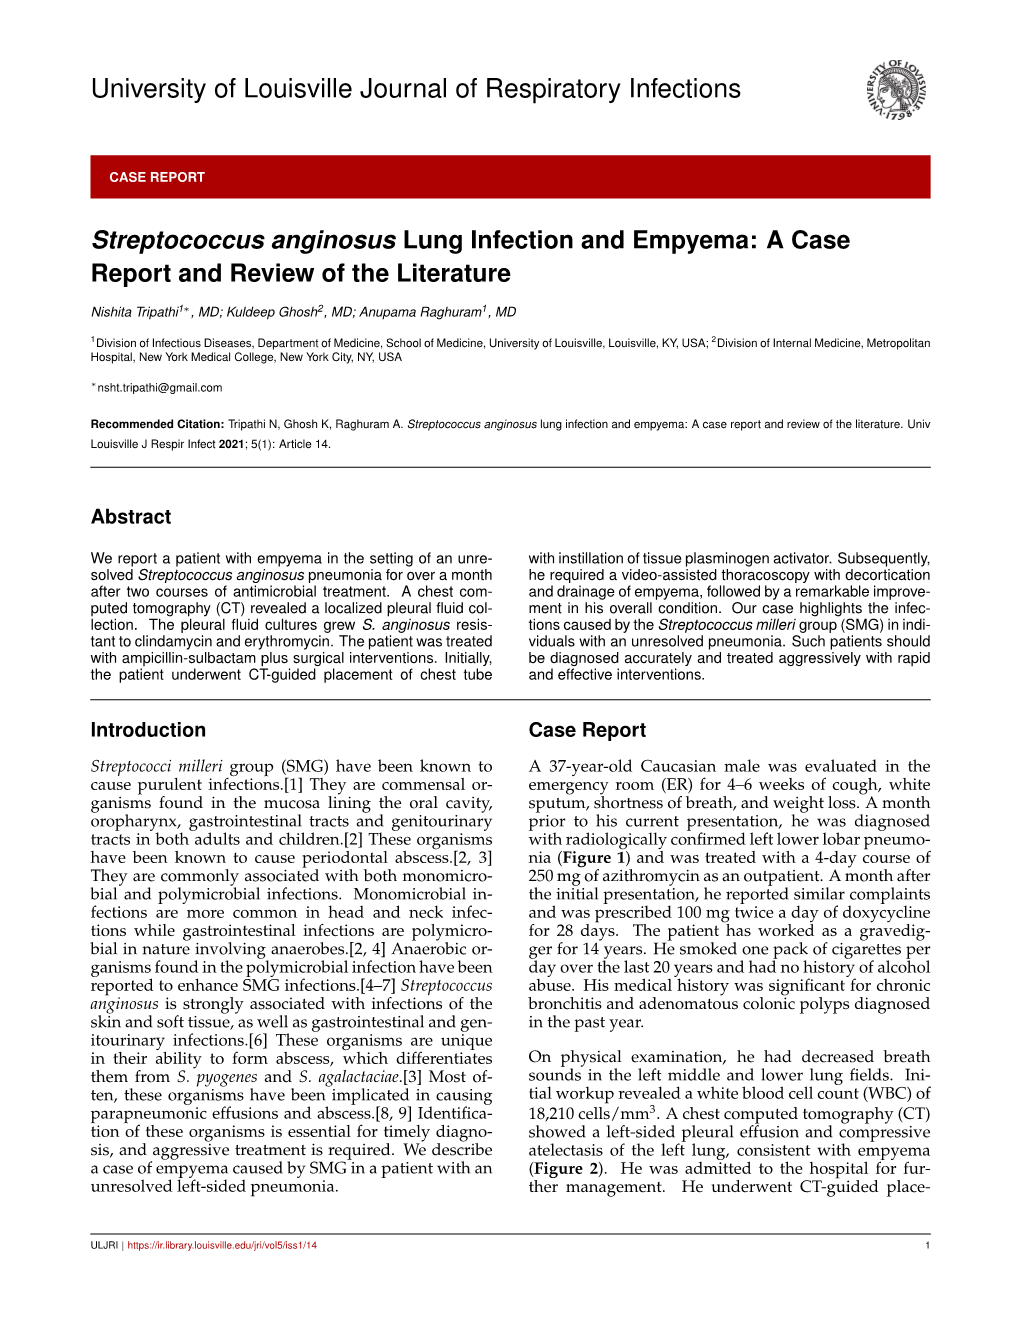 Streptococcus Anginosus Lung Infection and Empyema: a Case Report and Review of the Literature